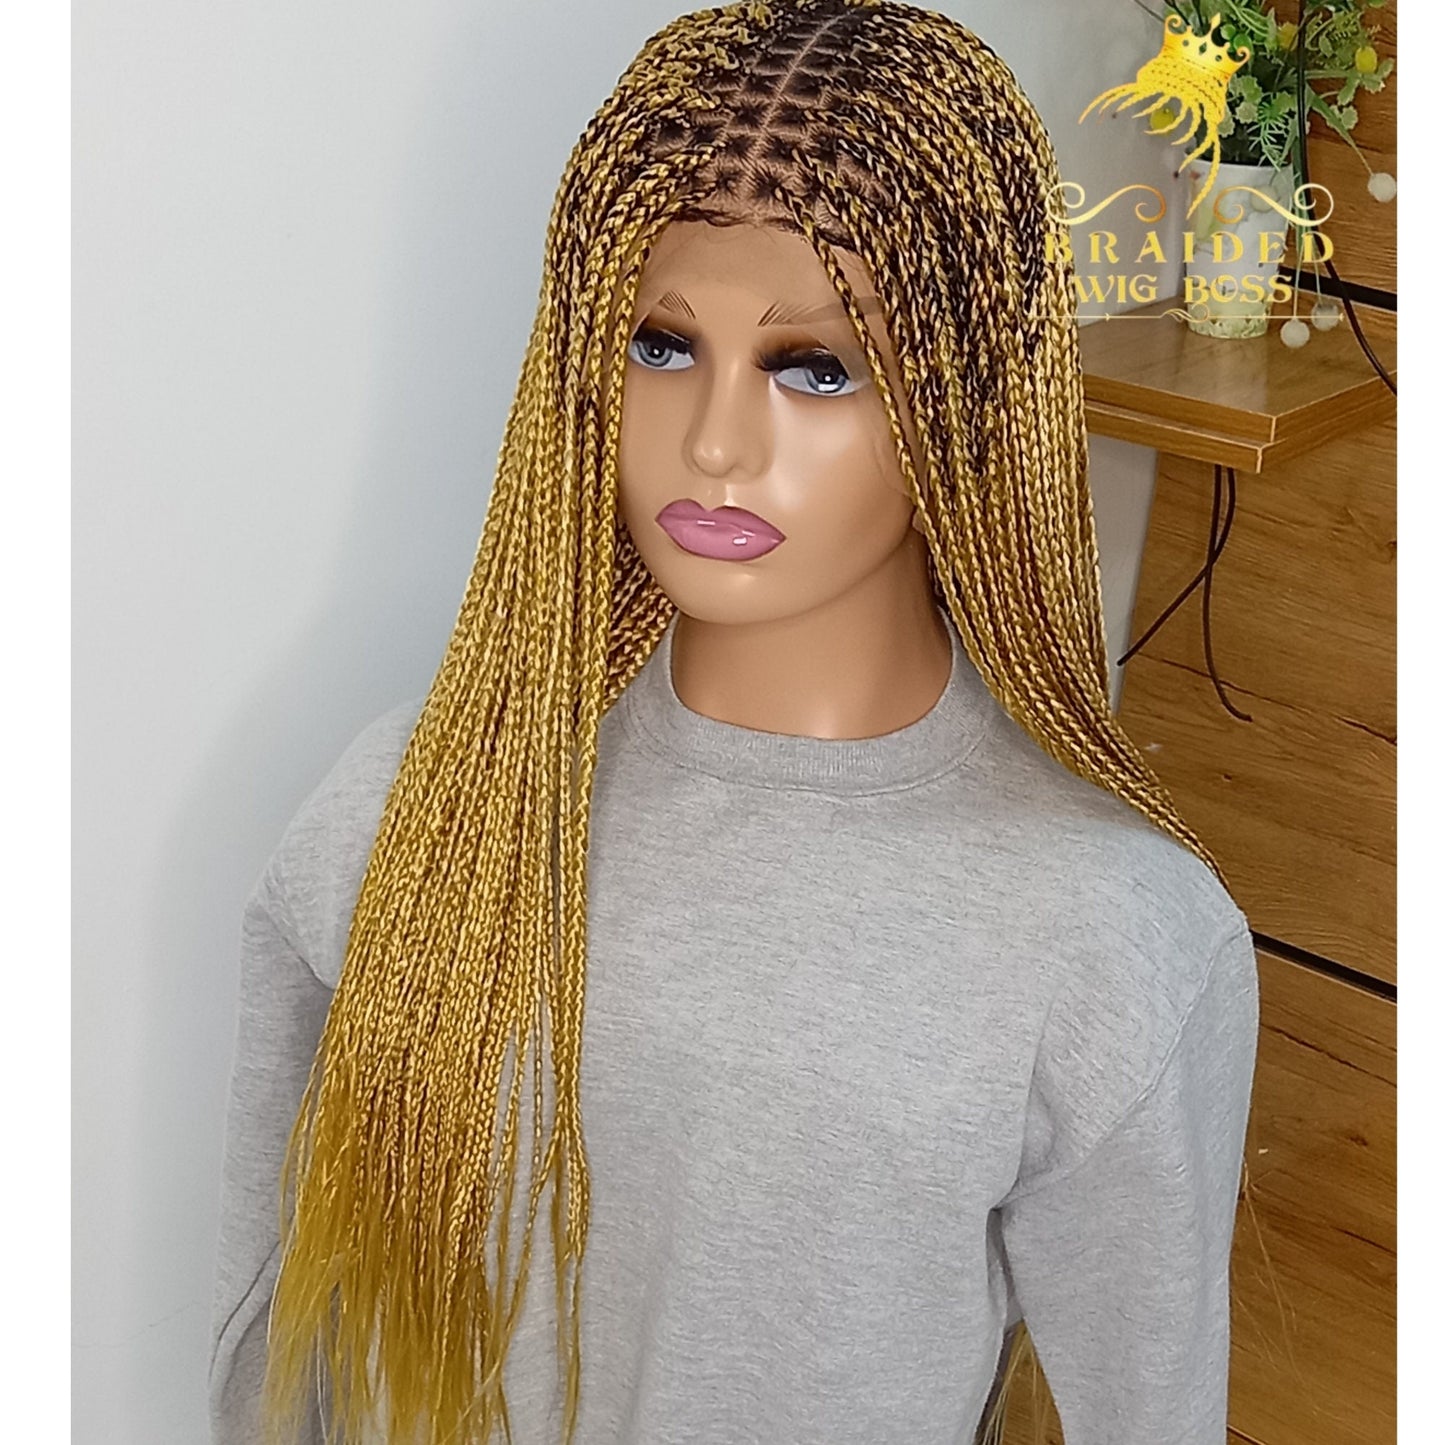 Blonde Knotless Braid Wig for Black Women, 13*6 Lace Front & Full Lace, Synthetic Heat Resistant Box Braided Wig in Various Colors/Lengths